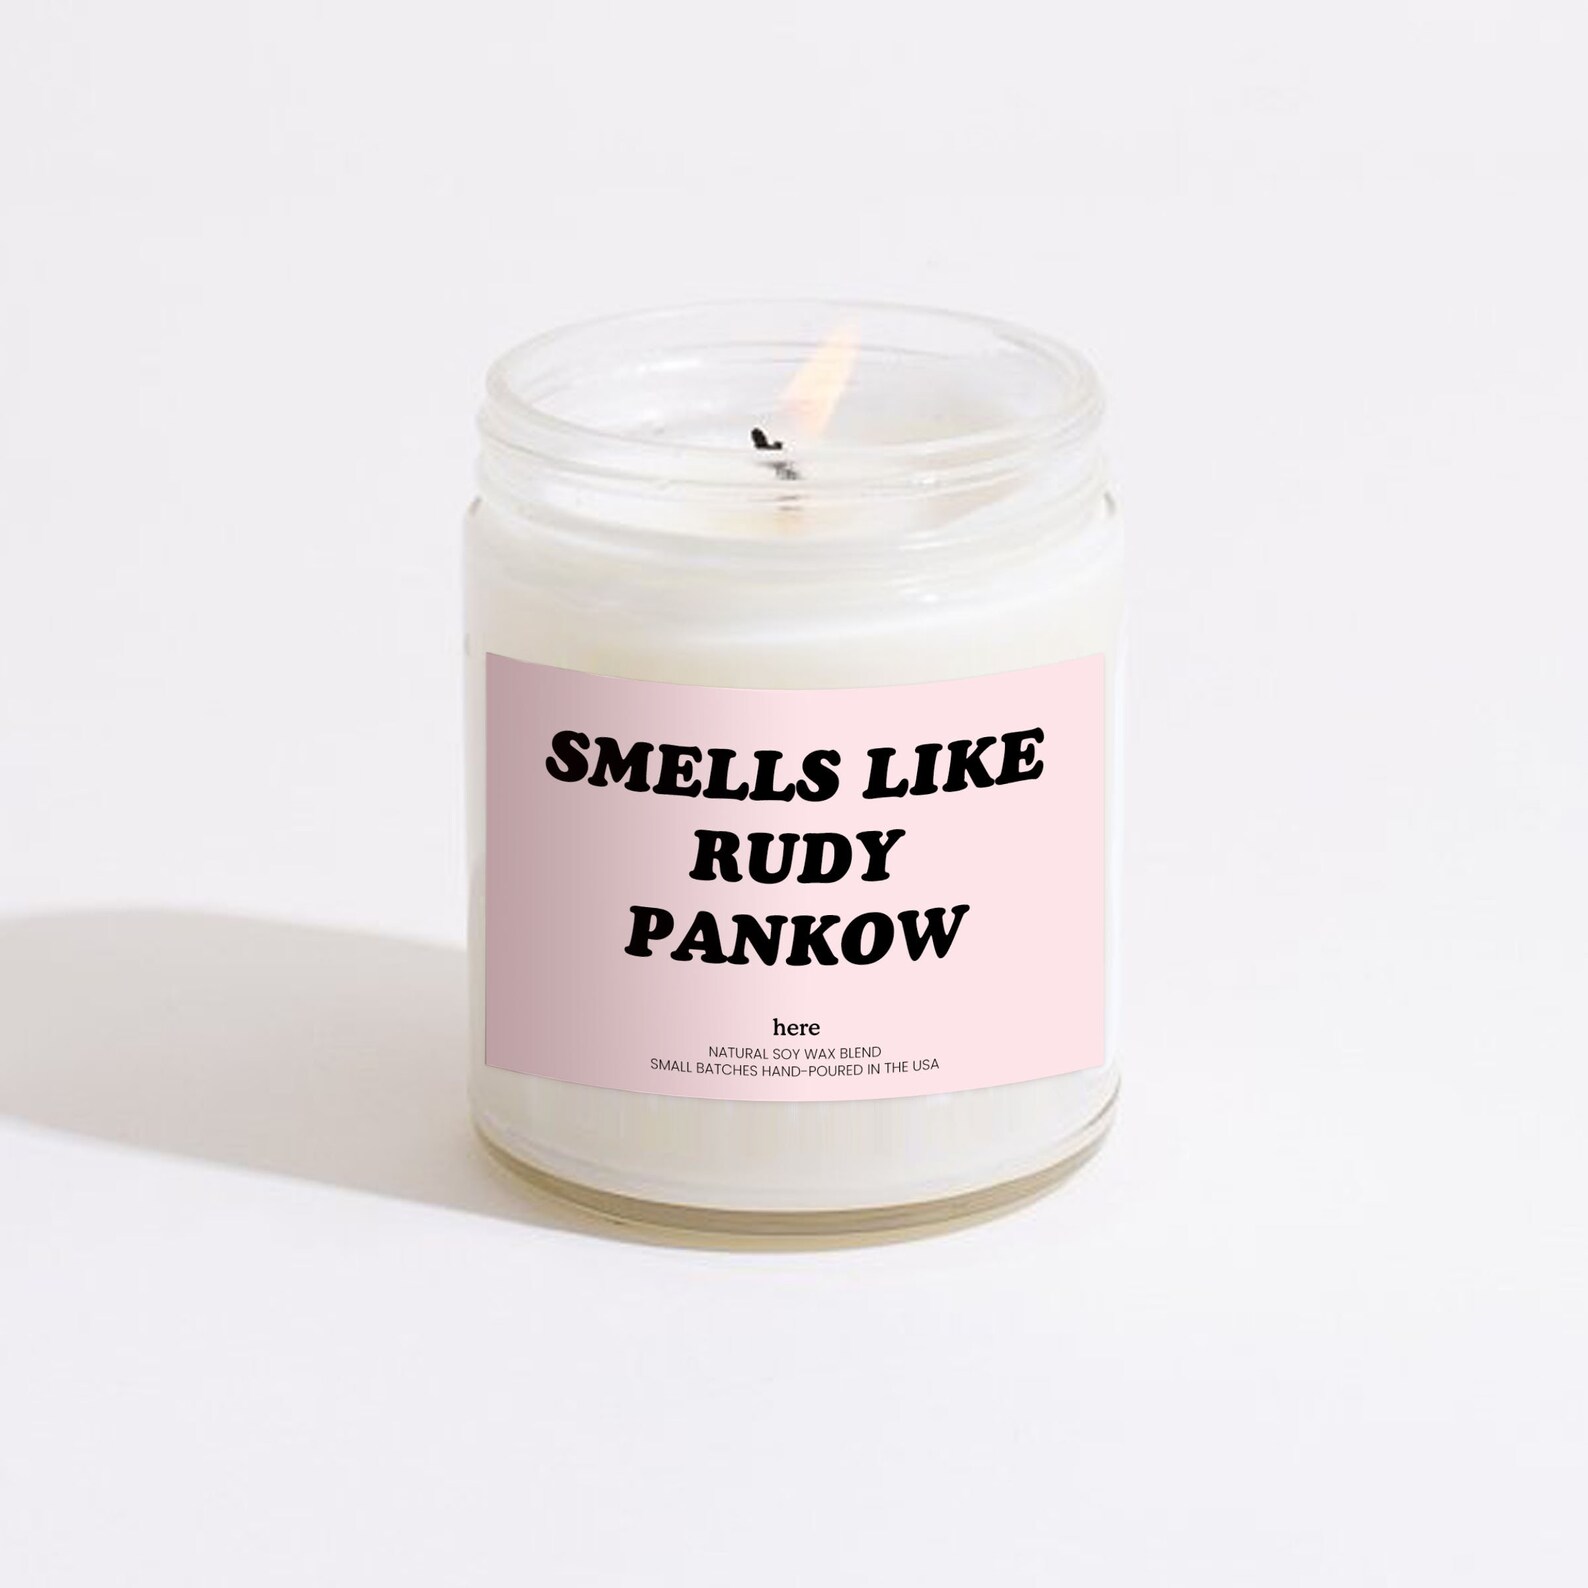 Smells Like Rudy Pankow Candle Pop Culture Gifts Funny - Etsy